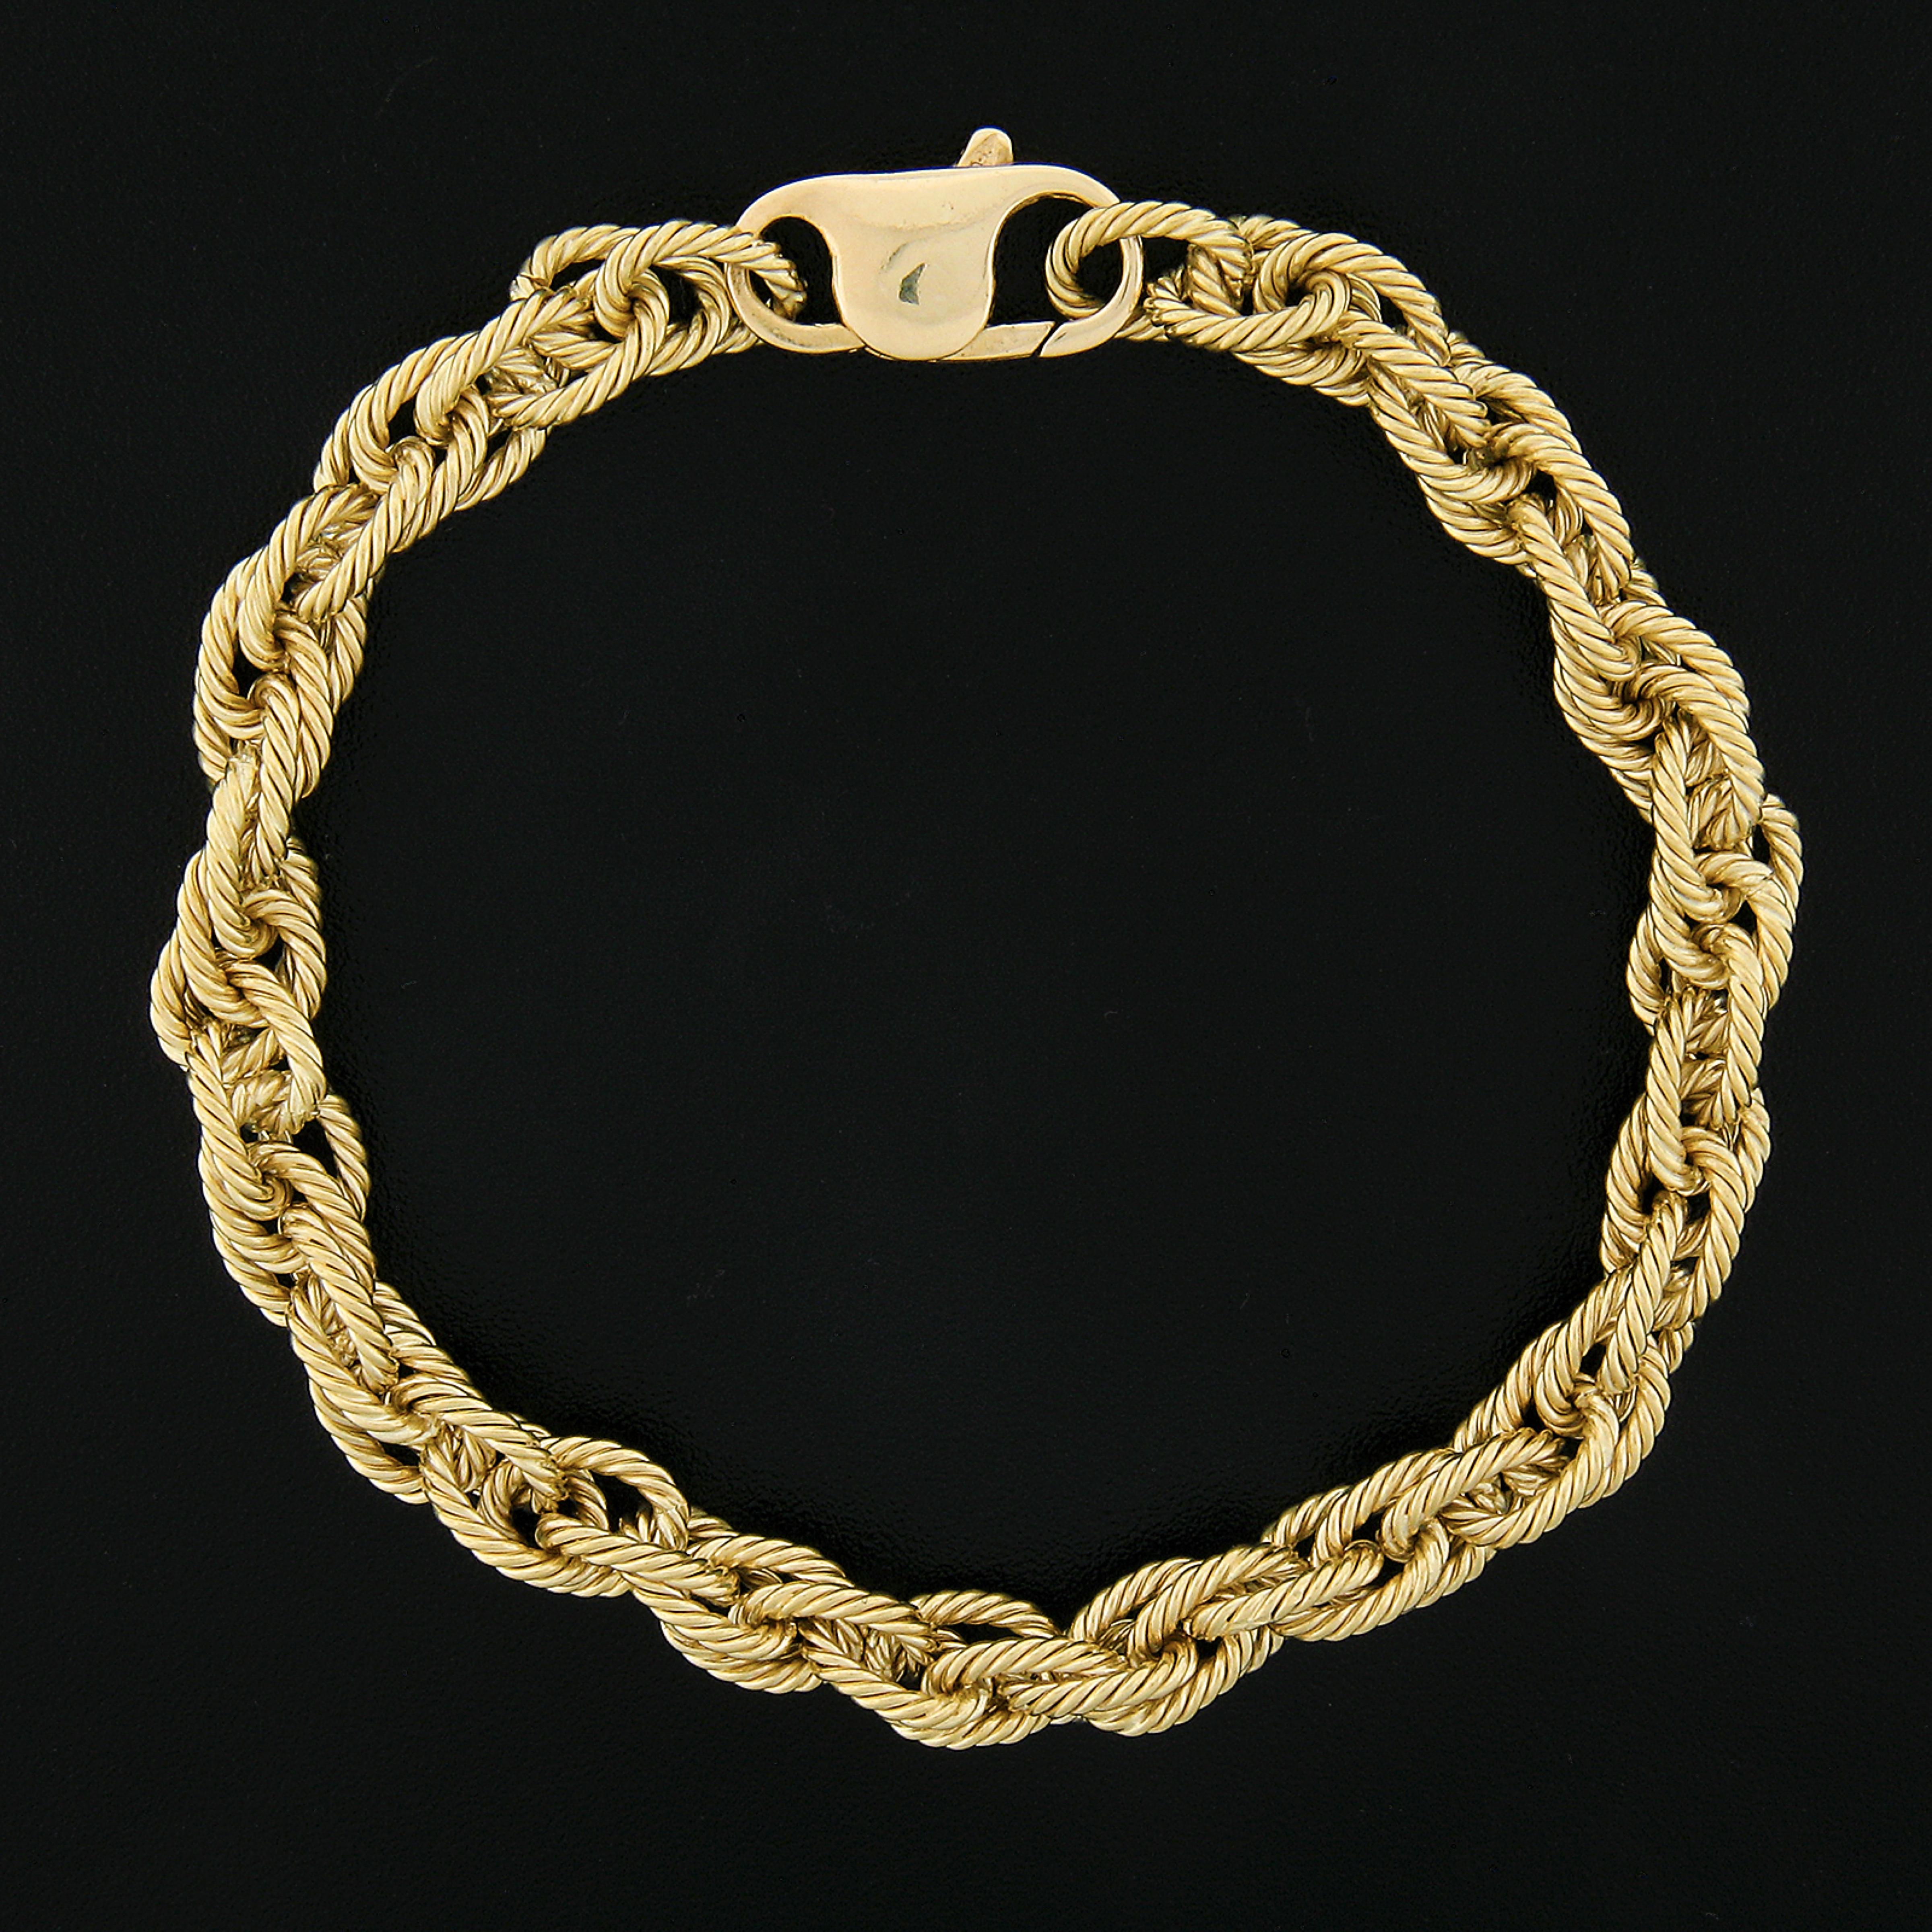 18k Yellow Gold Woven Textured Interlocking Cable Link Bracelet w/ Large Clasp 2